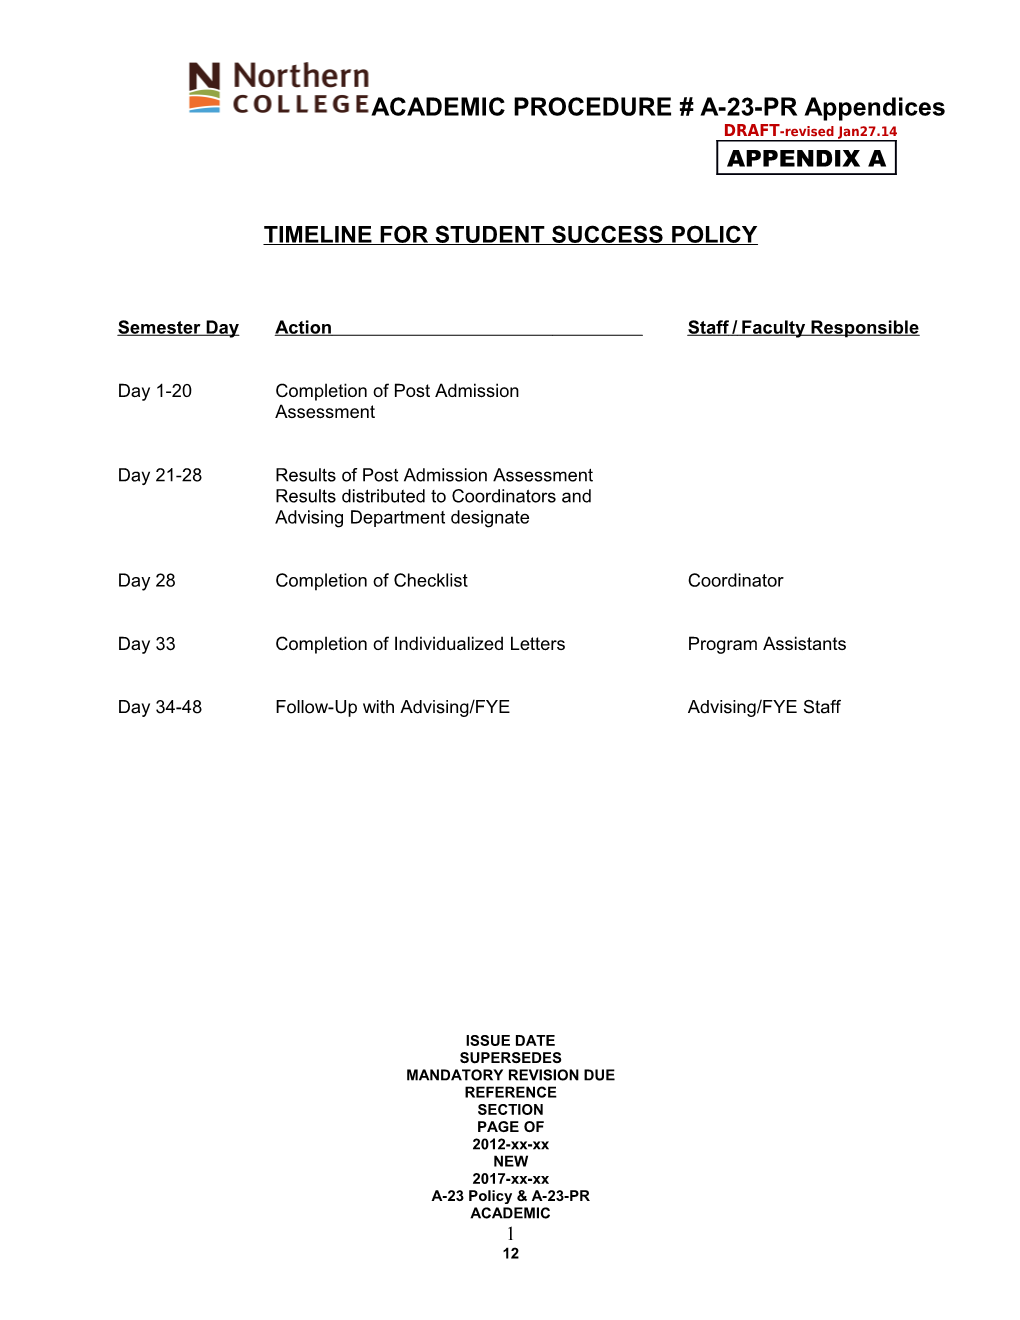 Timeline for Student Success Policy